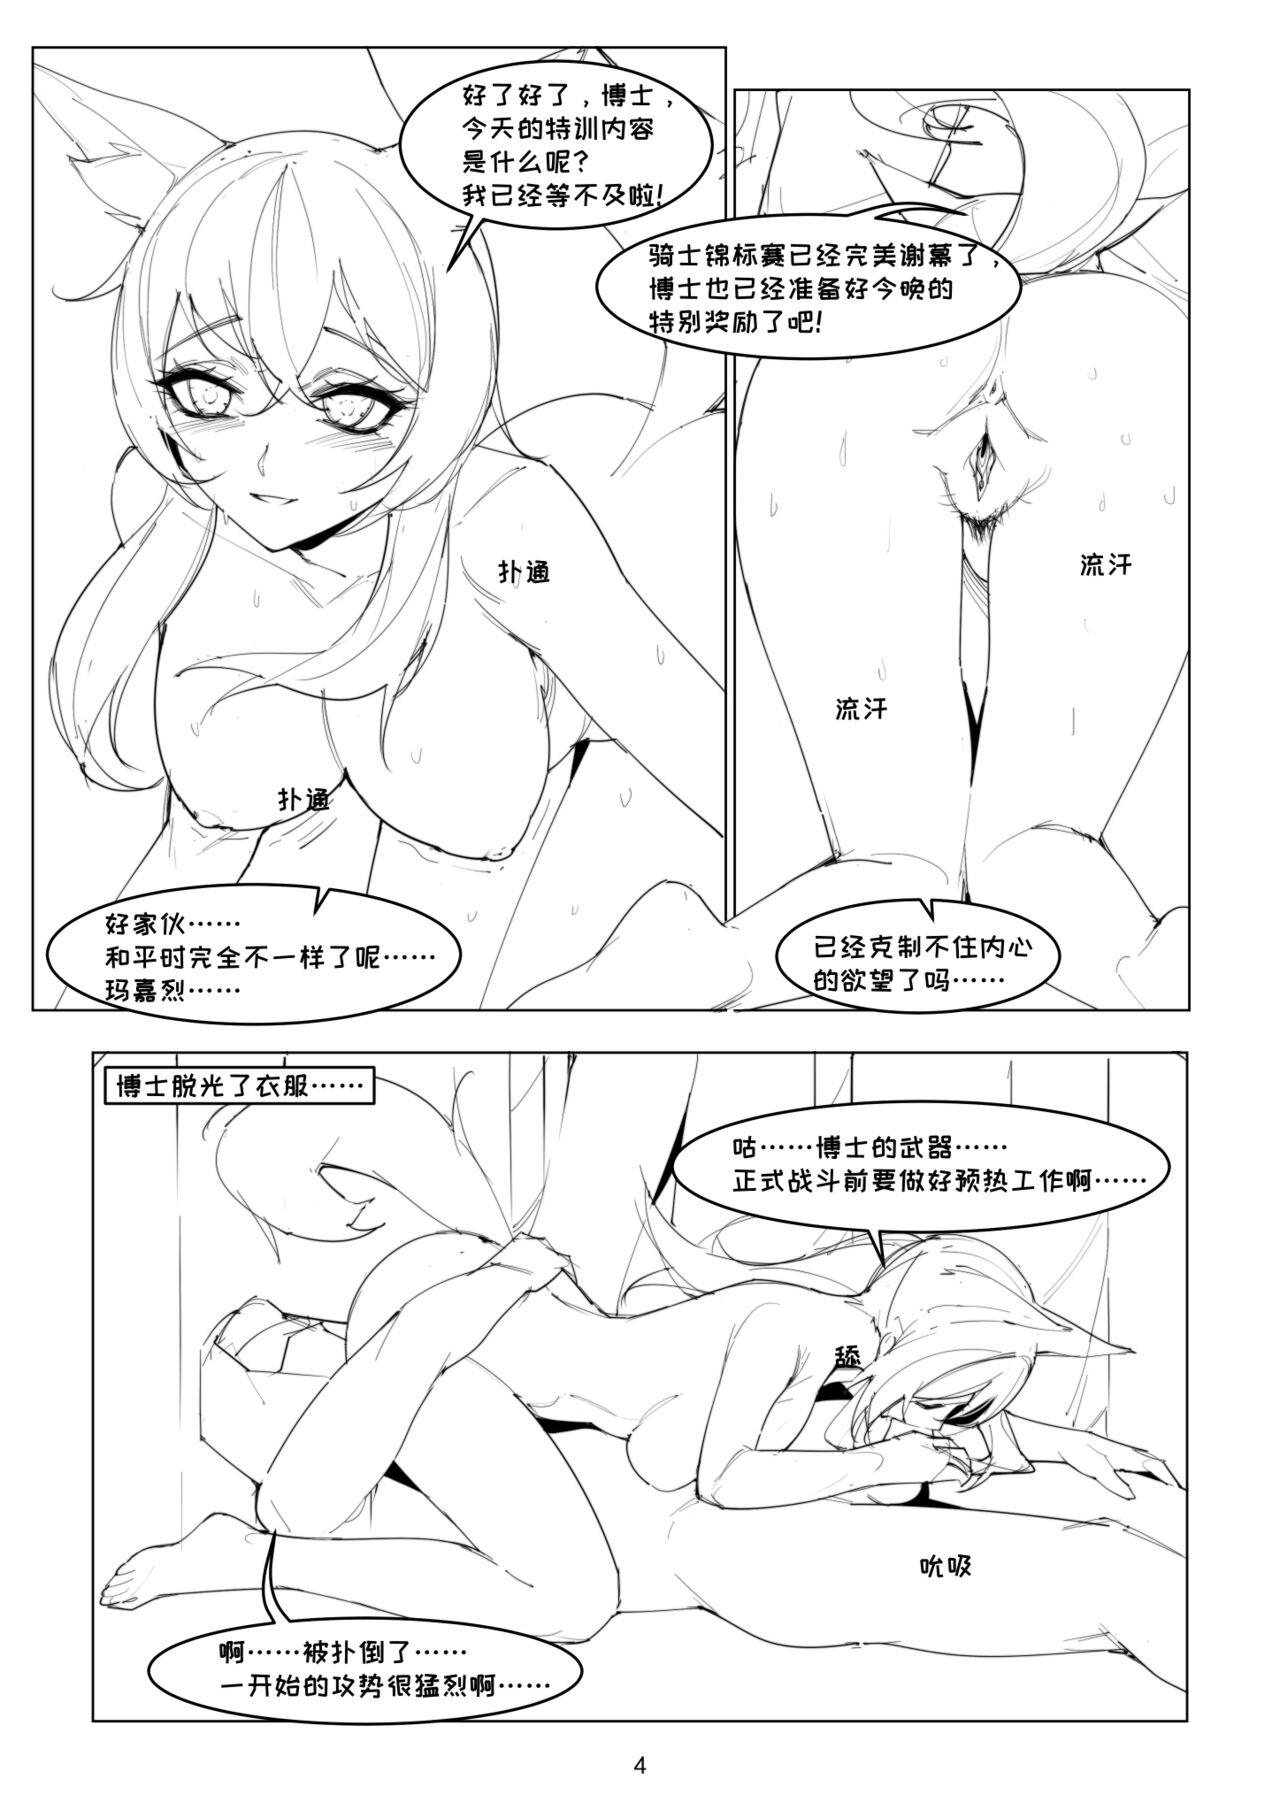 Novinha 【Tomorrow Ark】my love horse - Arknights 3some - Picture 3